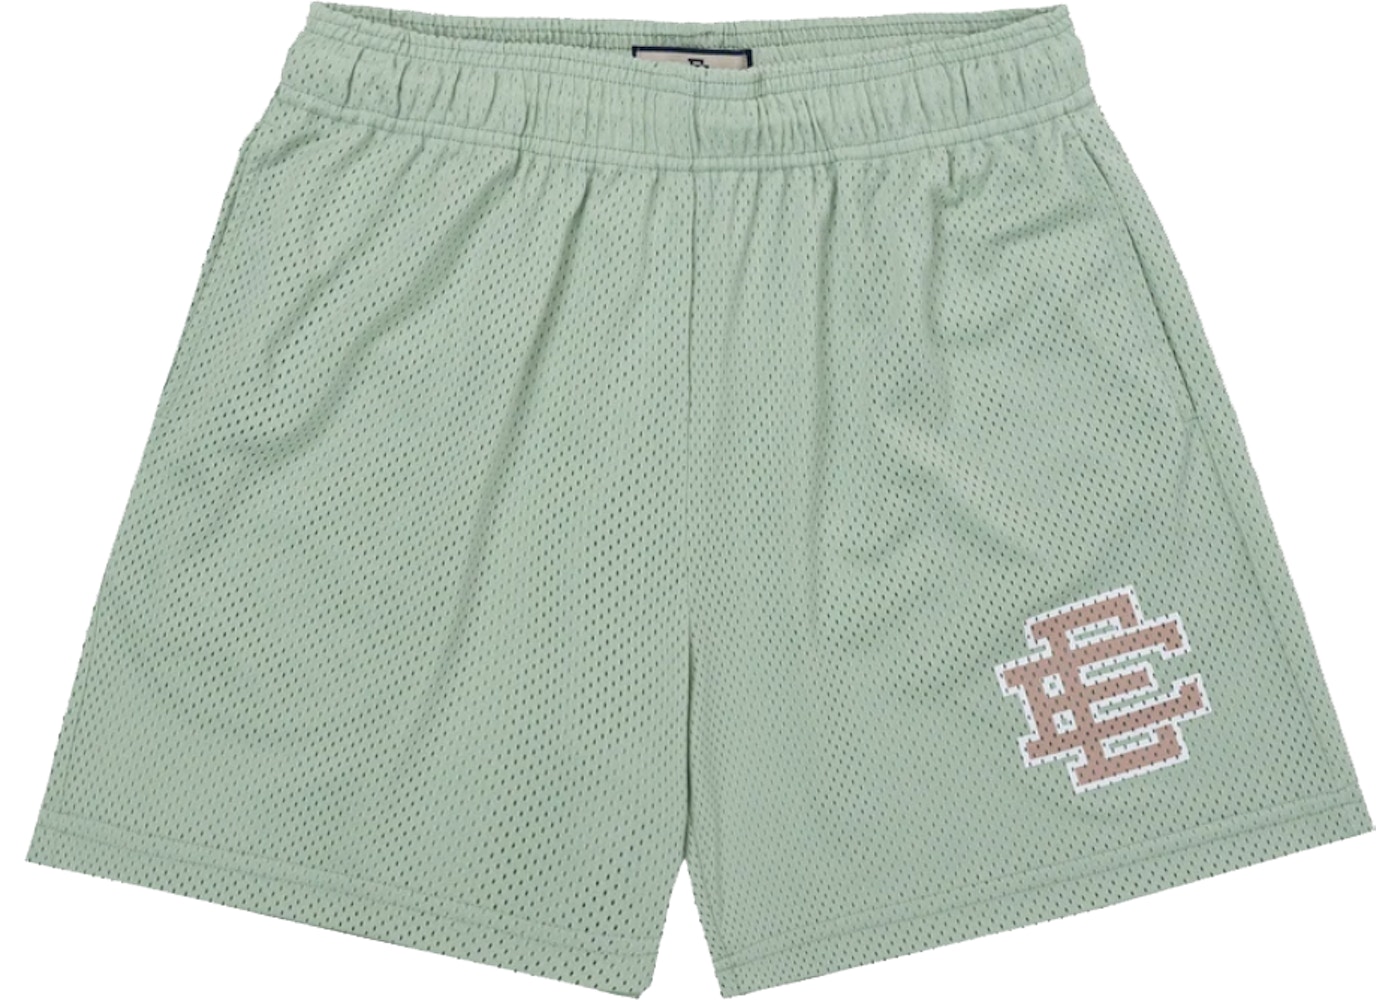 Eric Emanuel EE Basic Short Green/Taupe - SS21